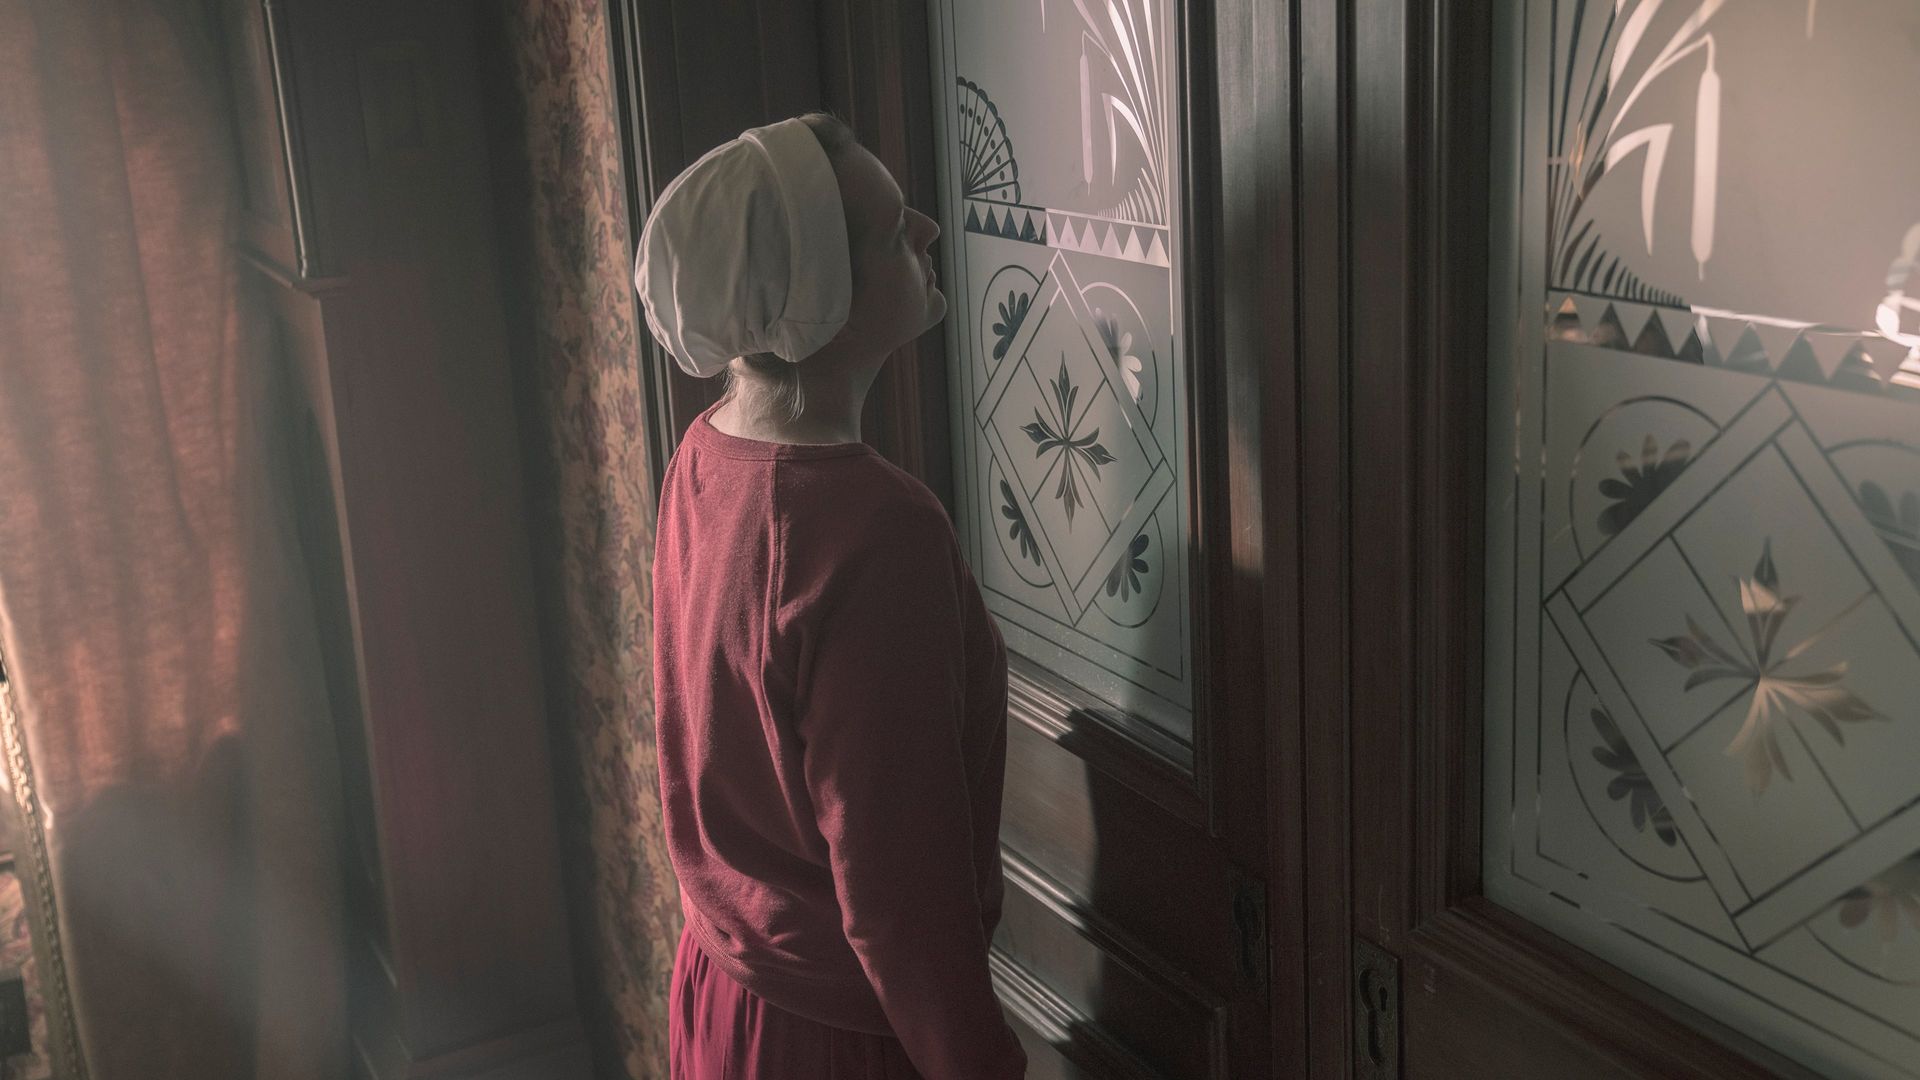 The Handmaid's Tale background